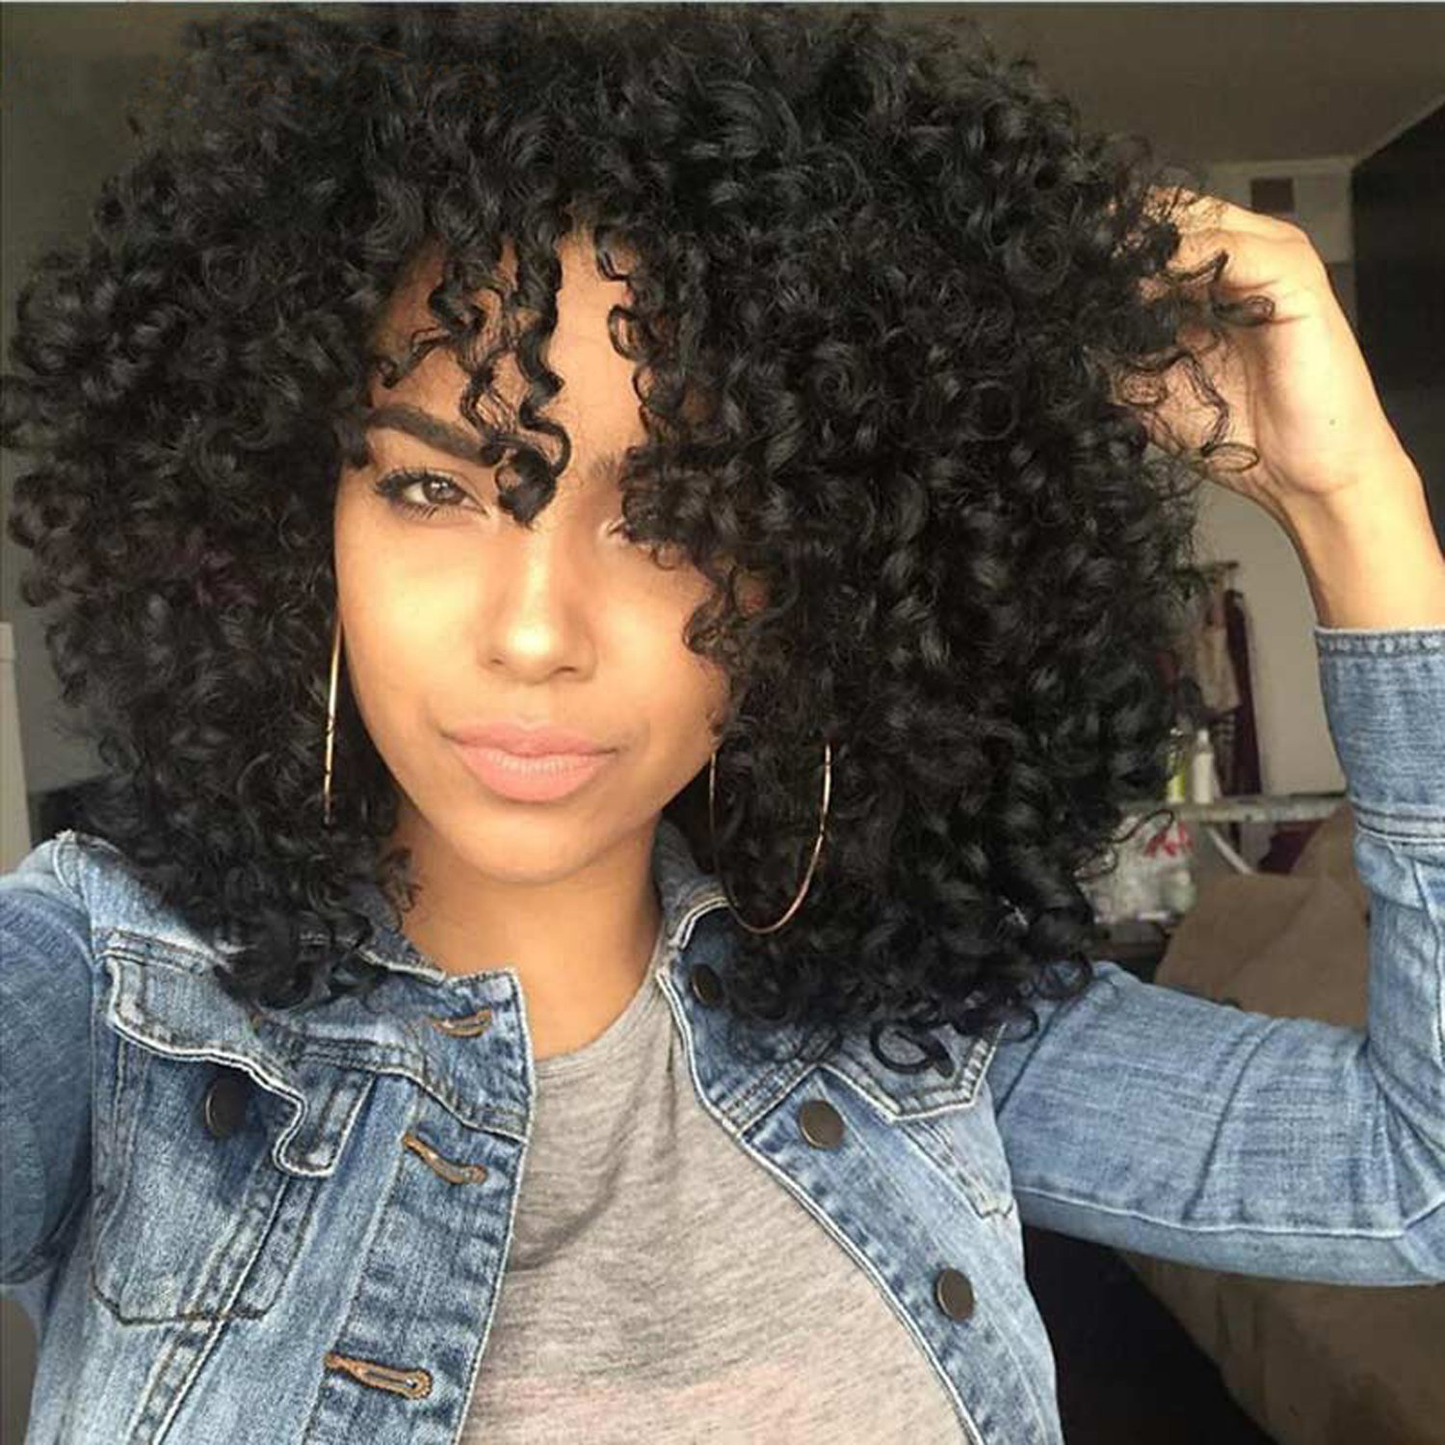 XINRAN Short Curly Afro Wig for Black Women,Kinky Black Curly Wigs for Women,Natural Synthetic Costume Curly Full Wig.